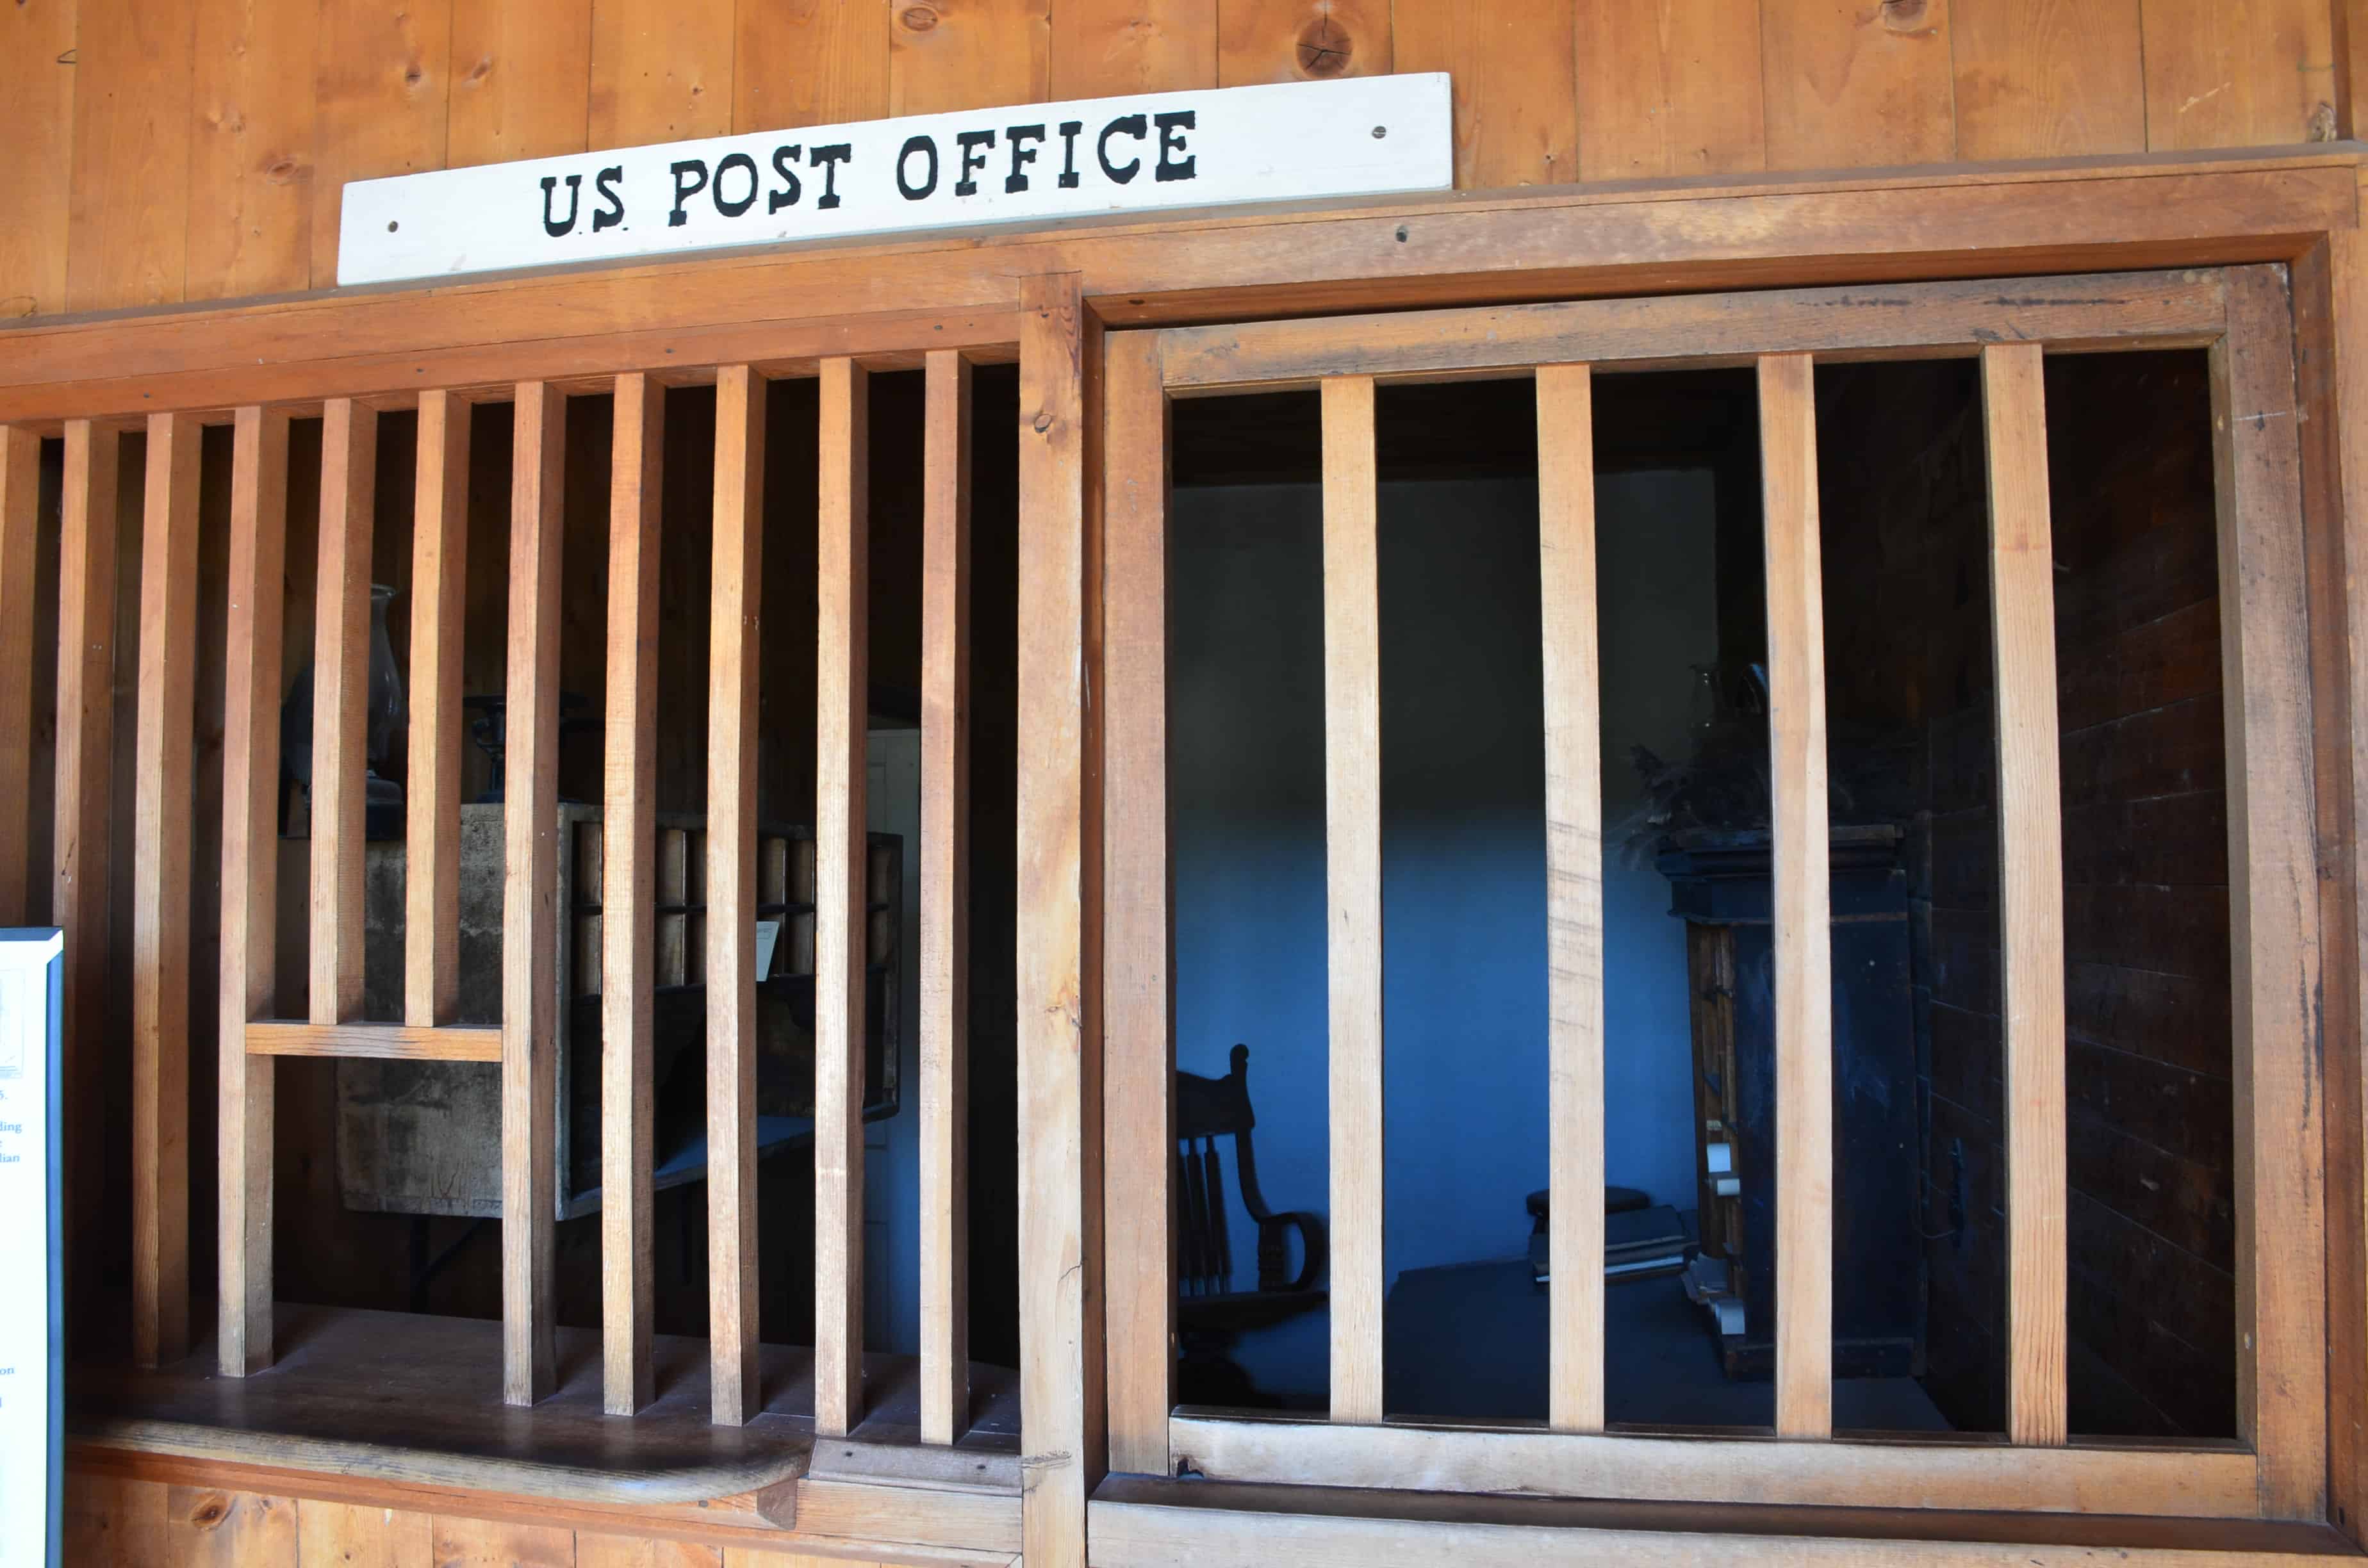 Post office at Fort Laramie National Historic Site in Wyoming